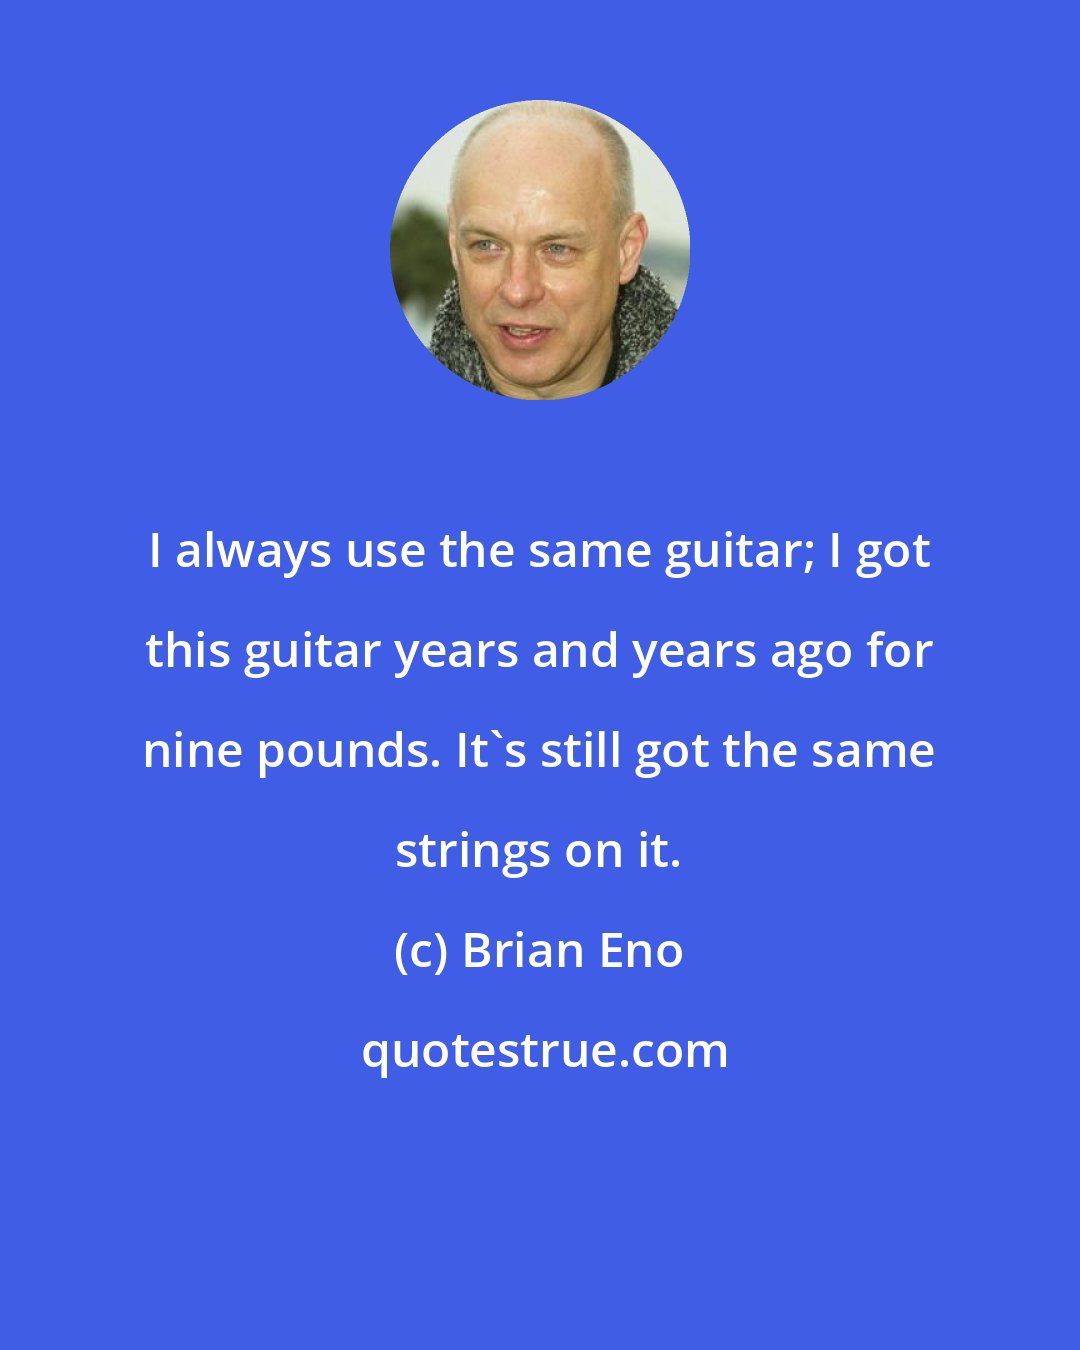 Brian Eno: I always use the same guitar; I got this guitar years and years ago for nine pounds. It's still got the same strings on it.